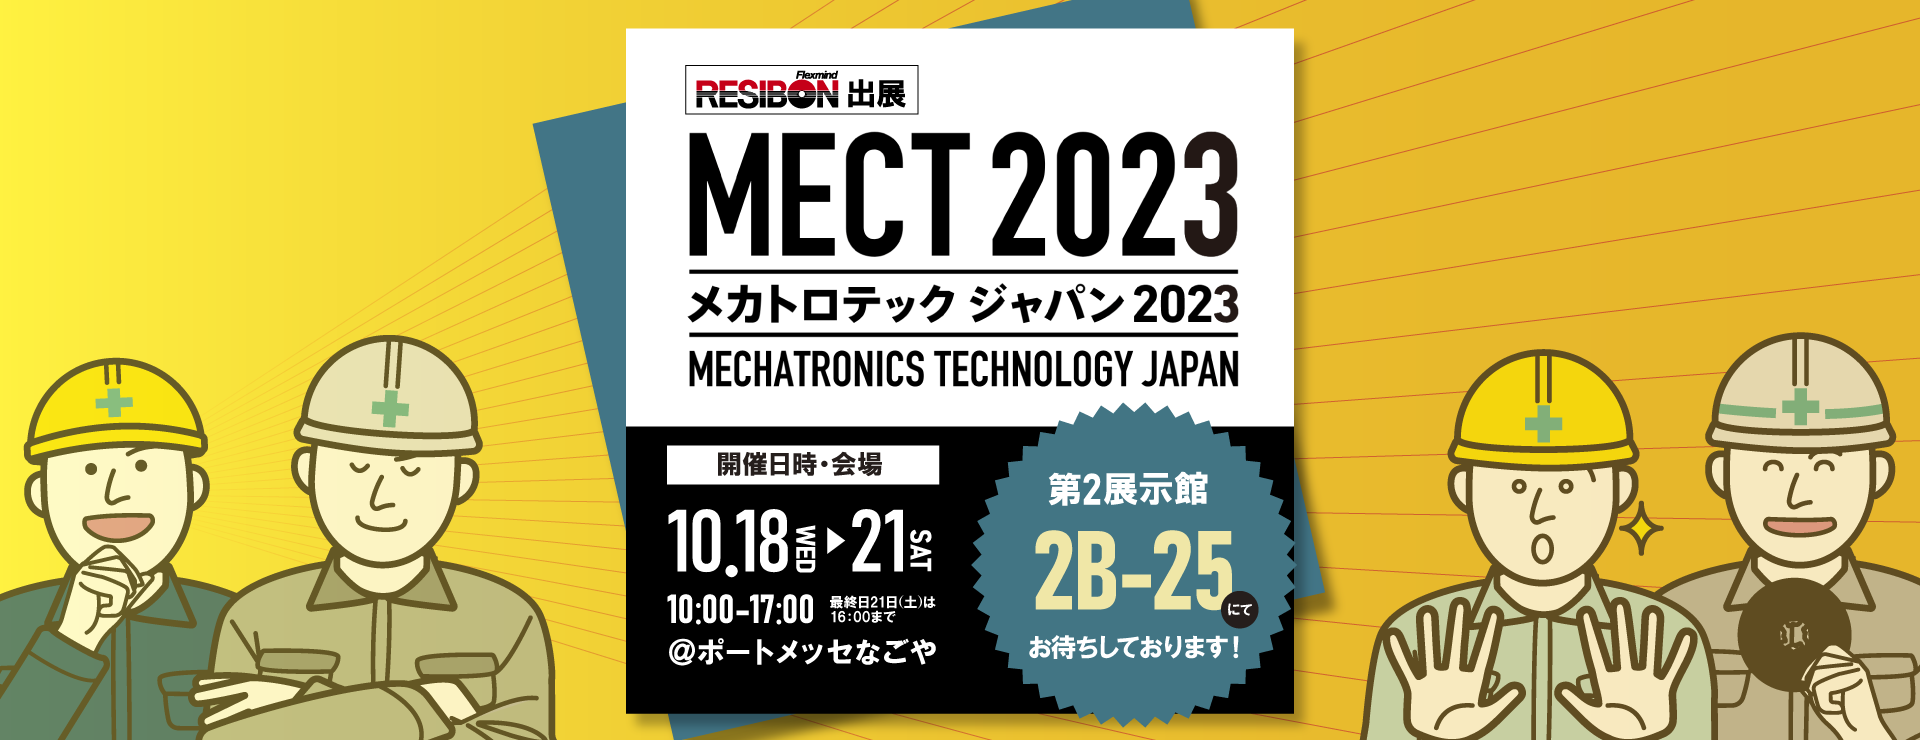 top_mect2023.png